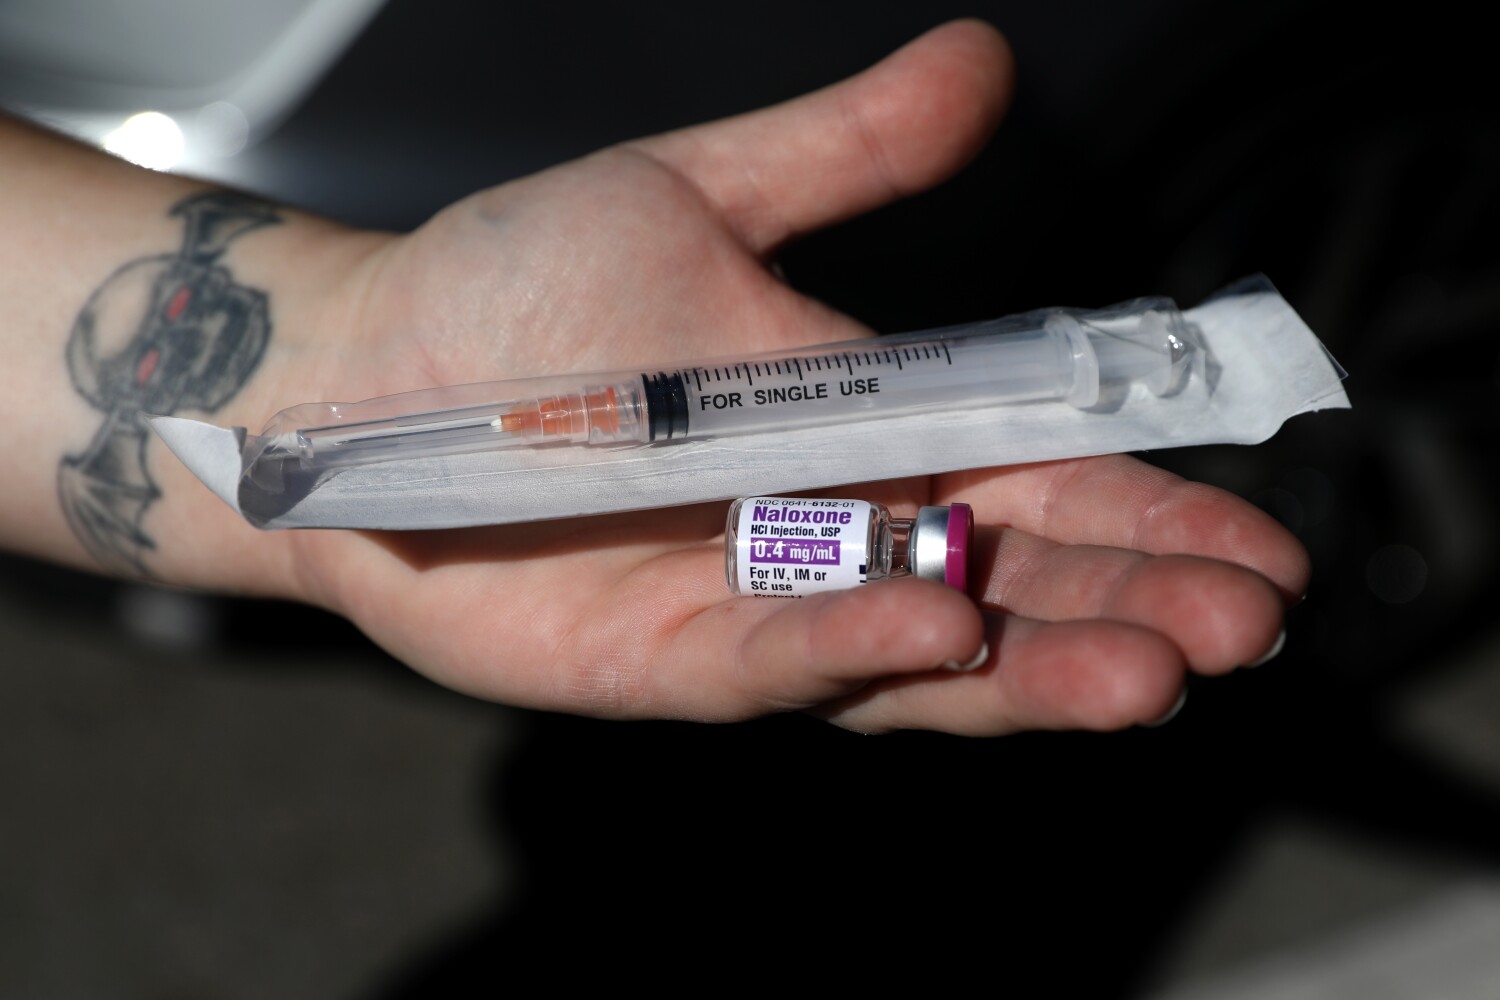 Naloxone helps prevent opioid deaths. Here's how to find and use it